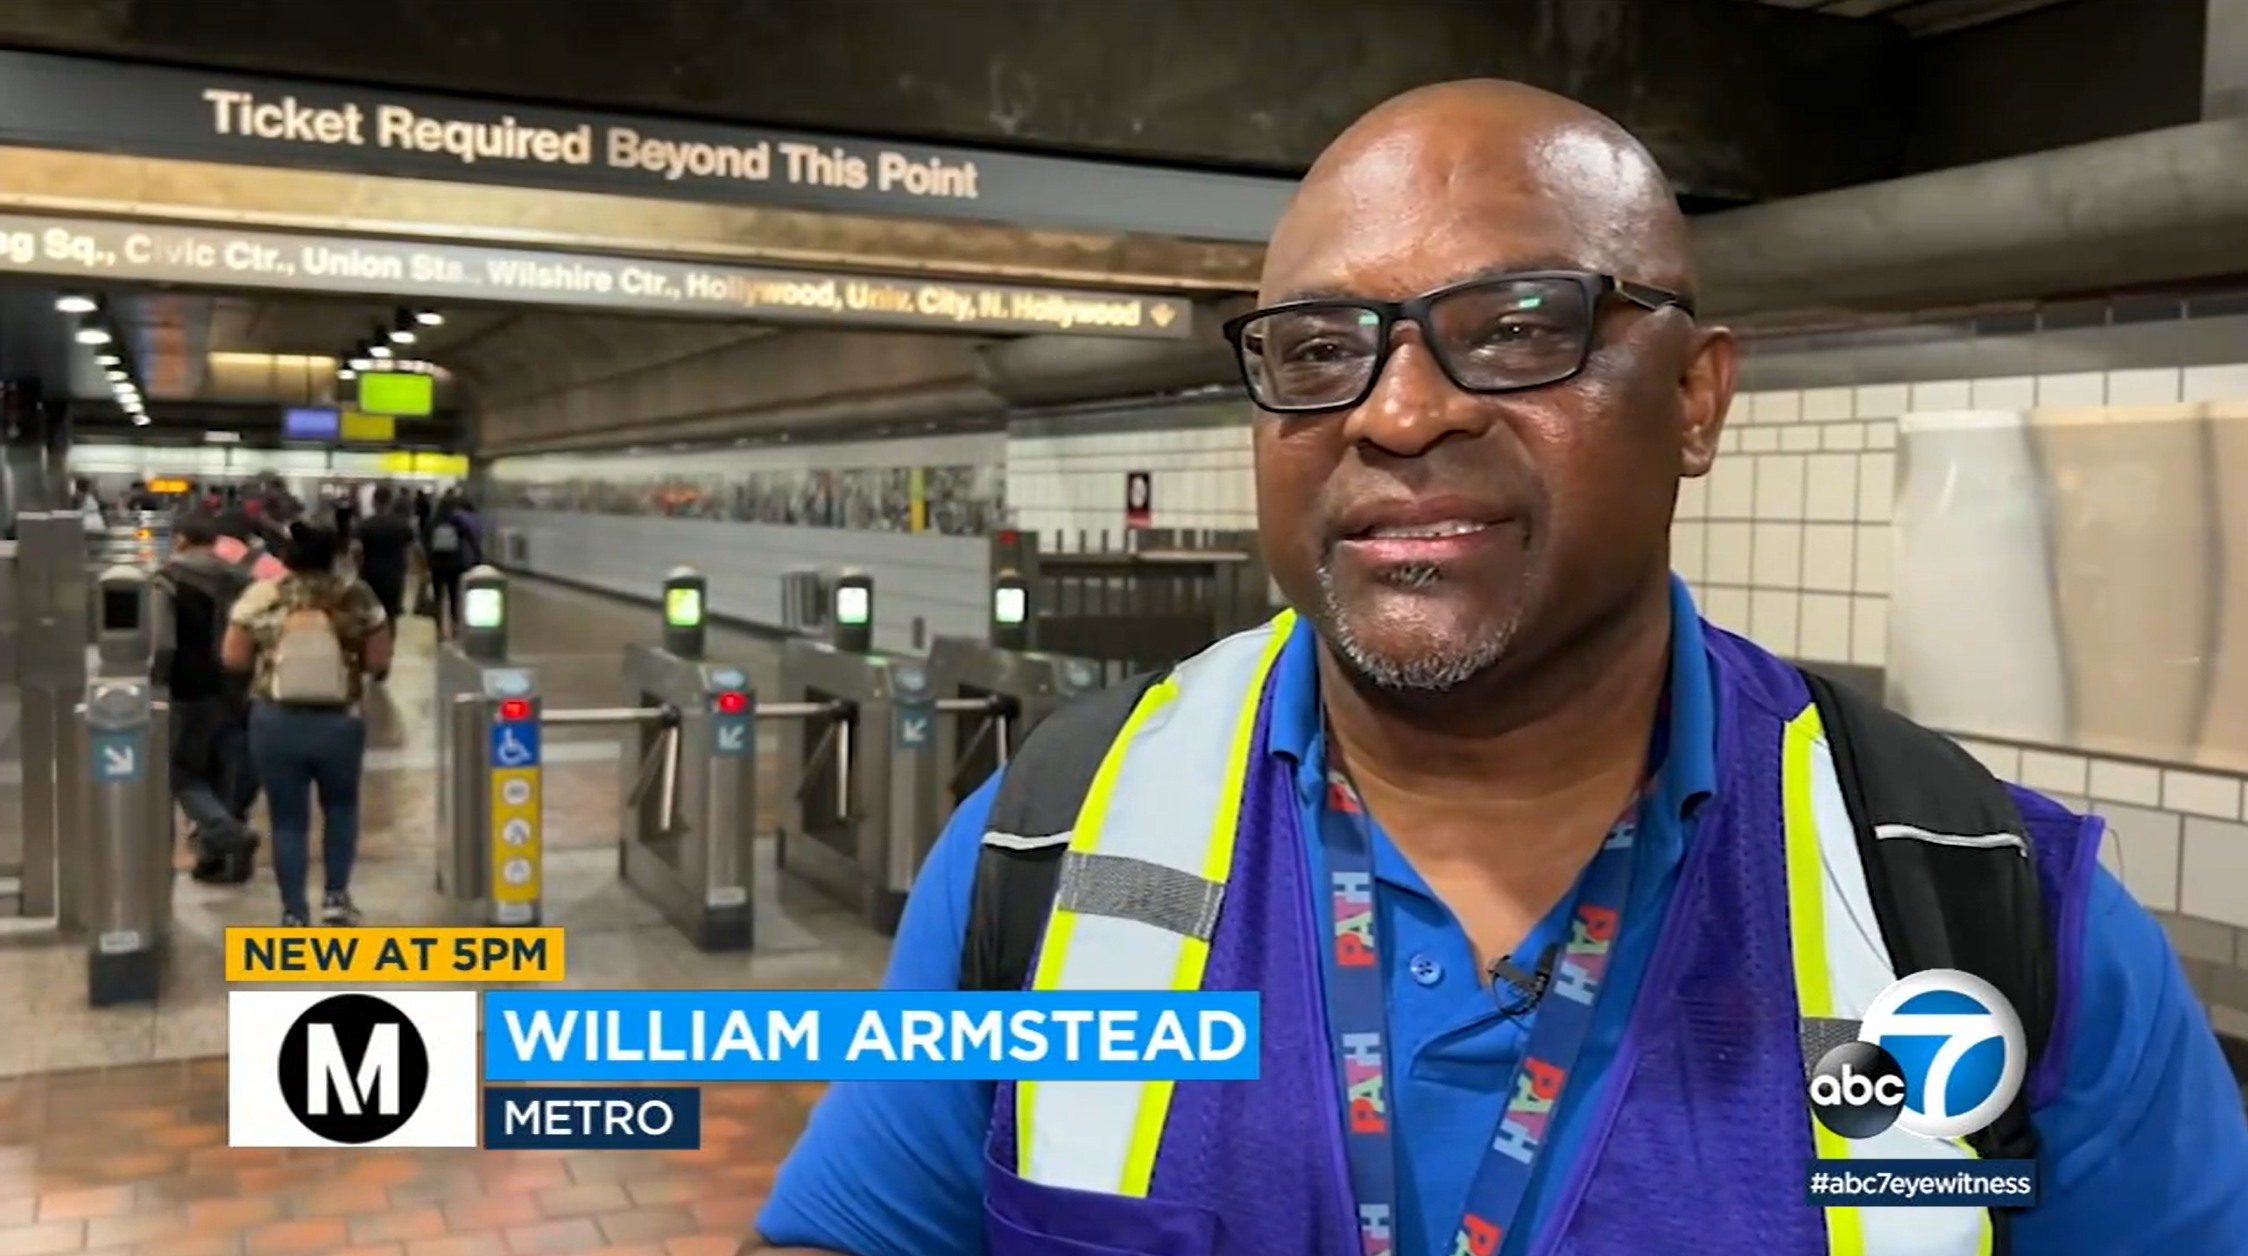 Outreach team deployed to help people on LA’s Metro transportation system